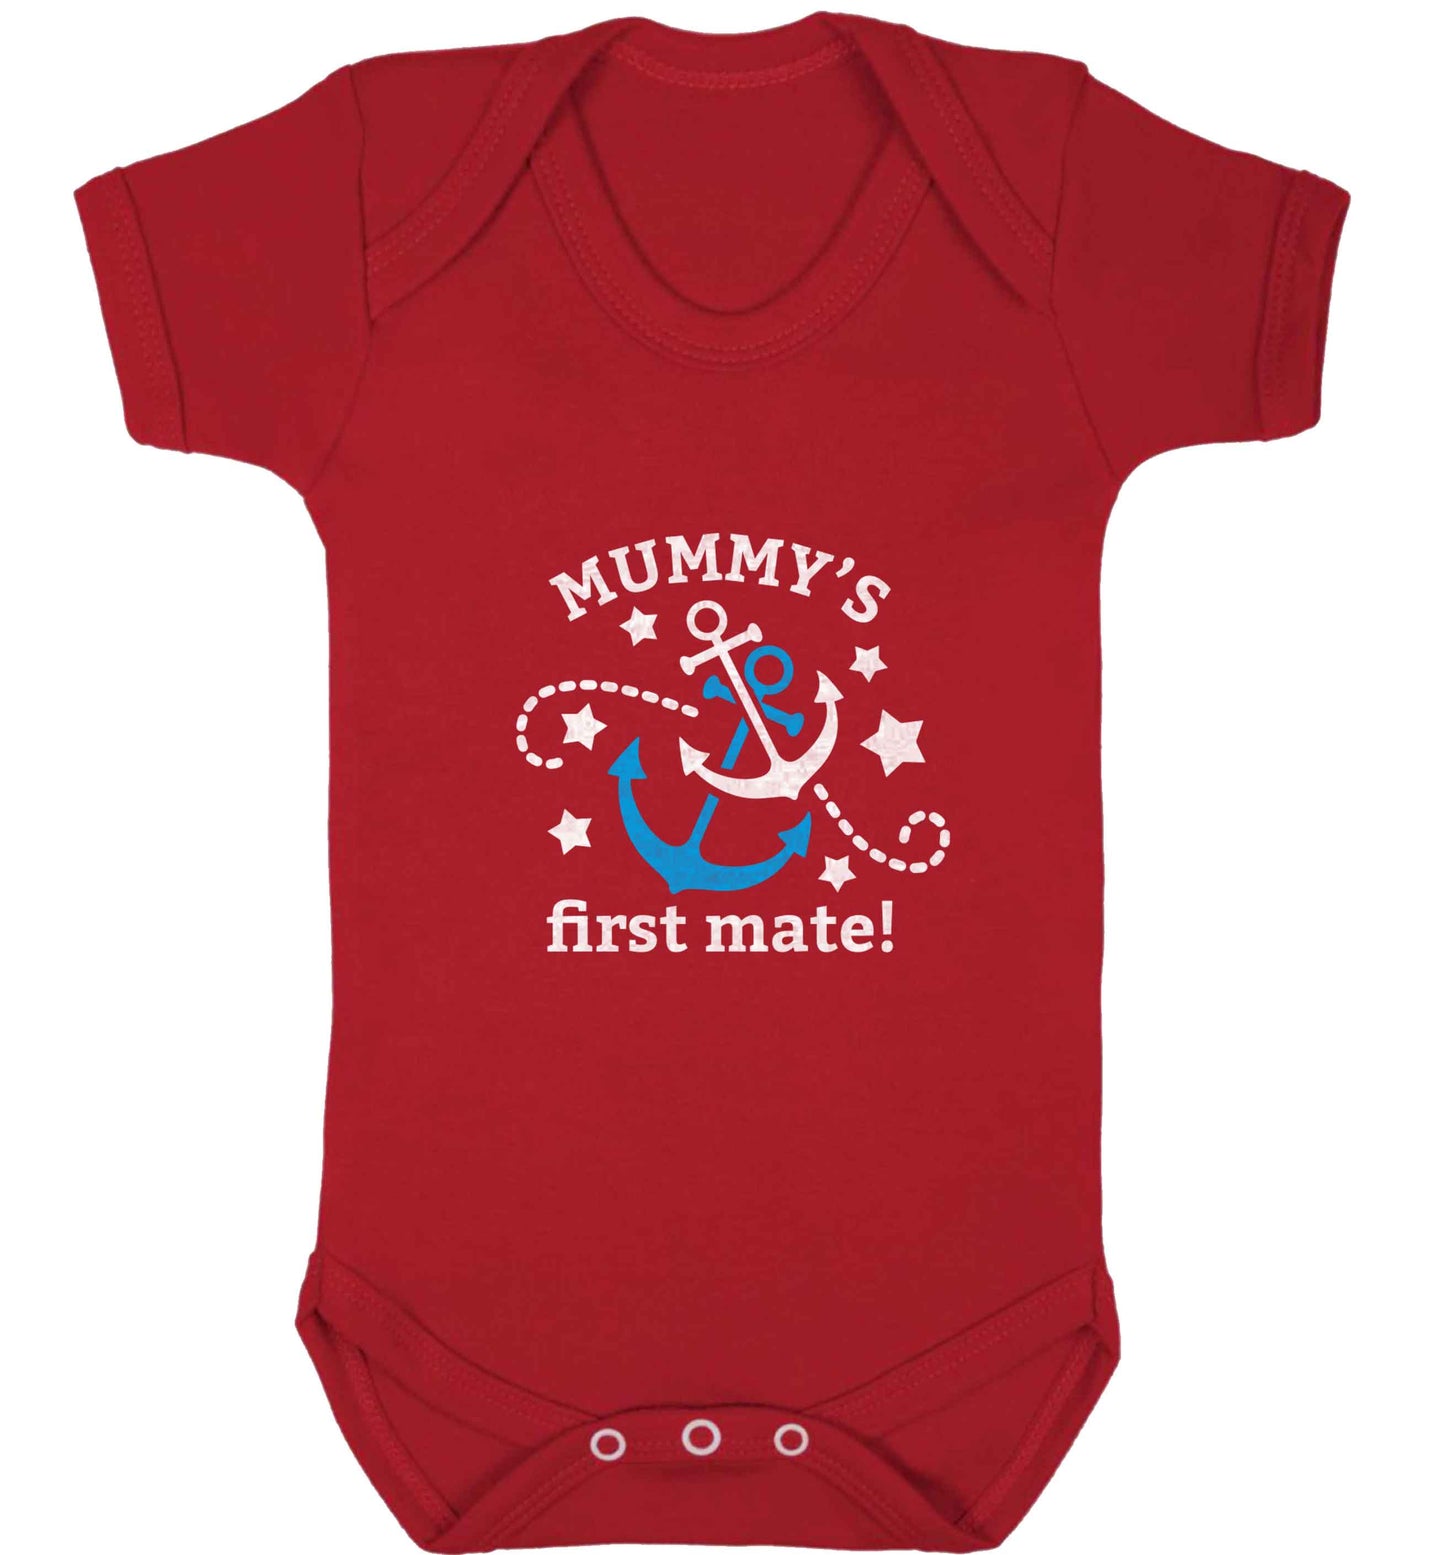 Mummy's First Mate baby vest red 18-24 months